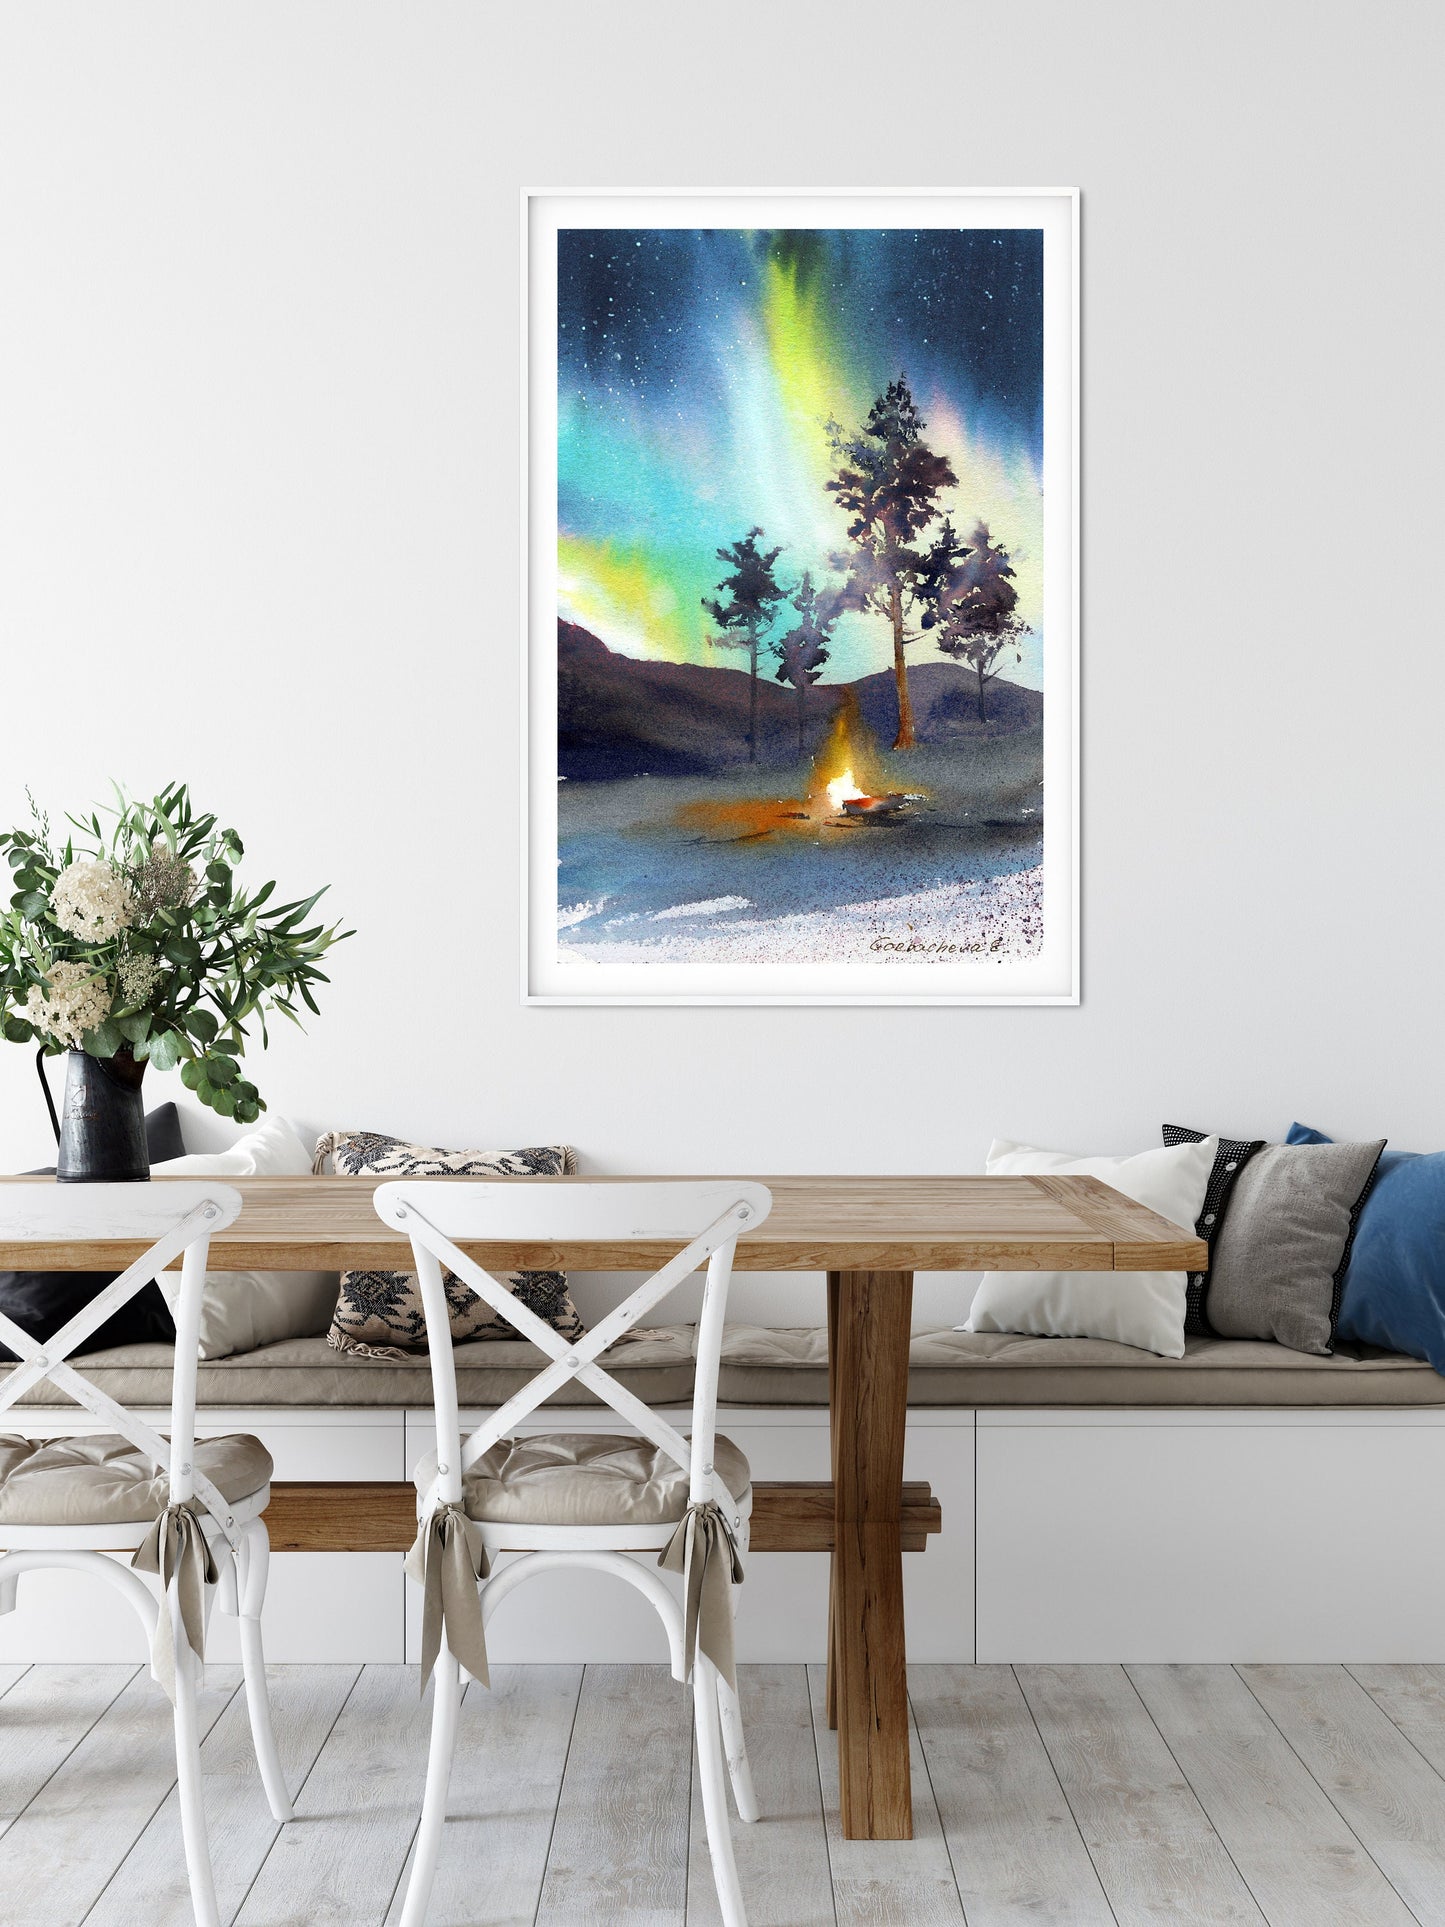 Northern lights Wall Art, Aurora Borealis Print, Winter Forest Landscape Watercolor Painting, Home Wall Decor, Canvas Print, Night Sky, Gift